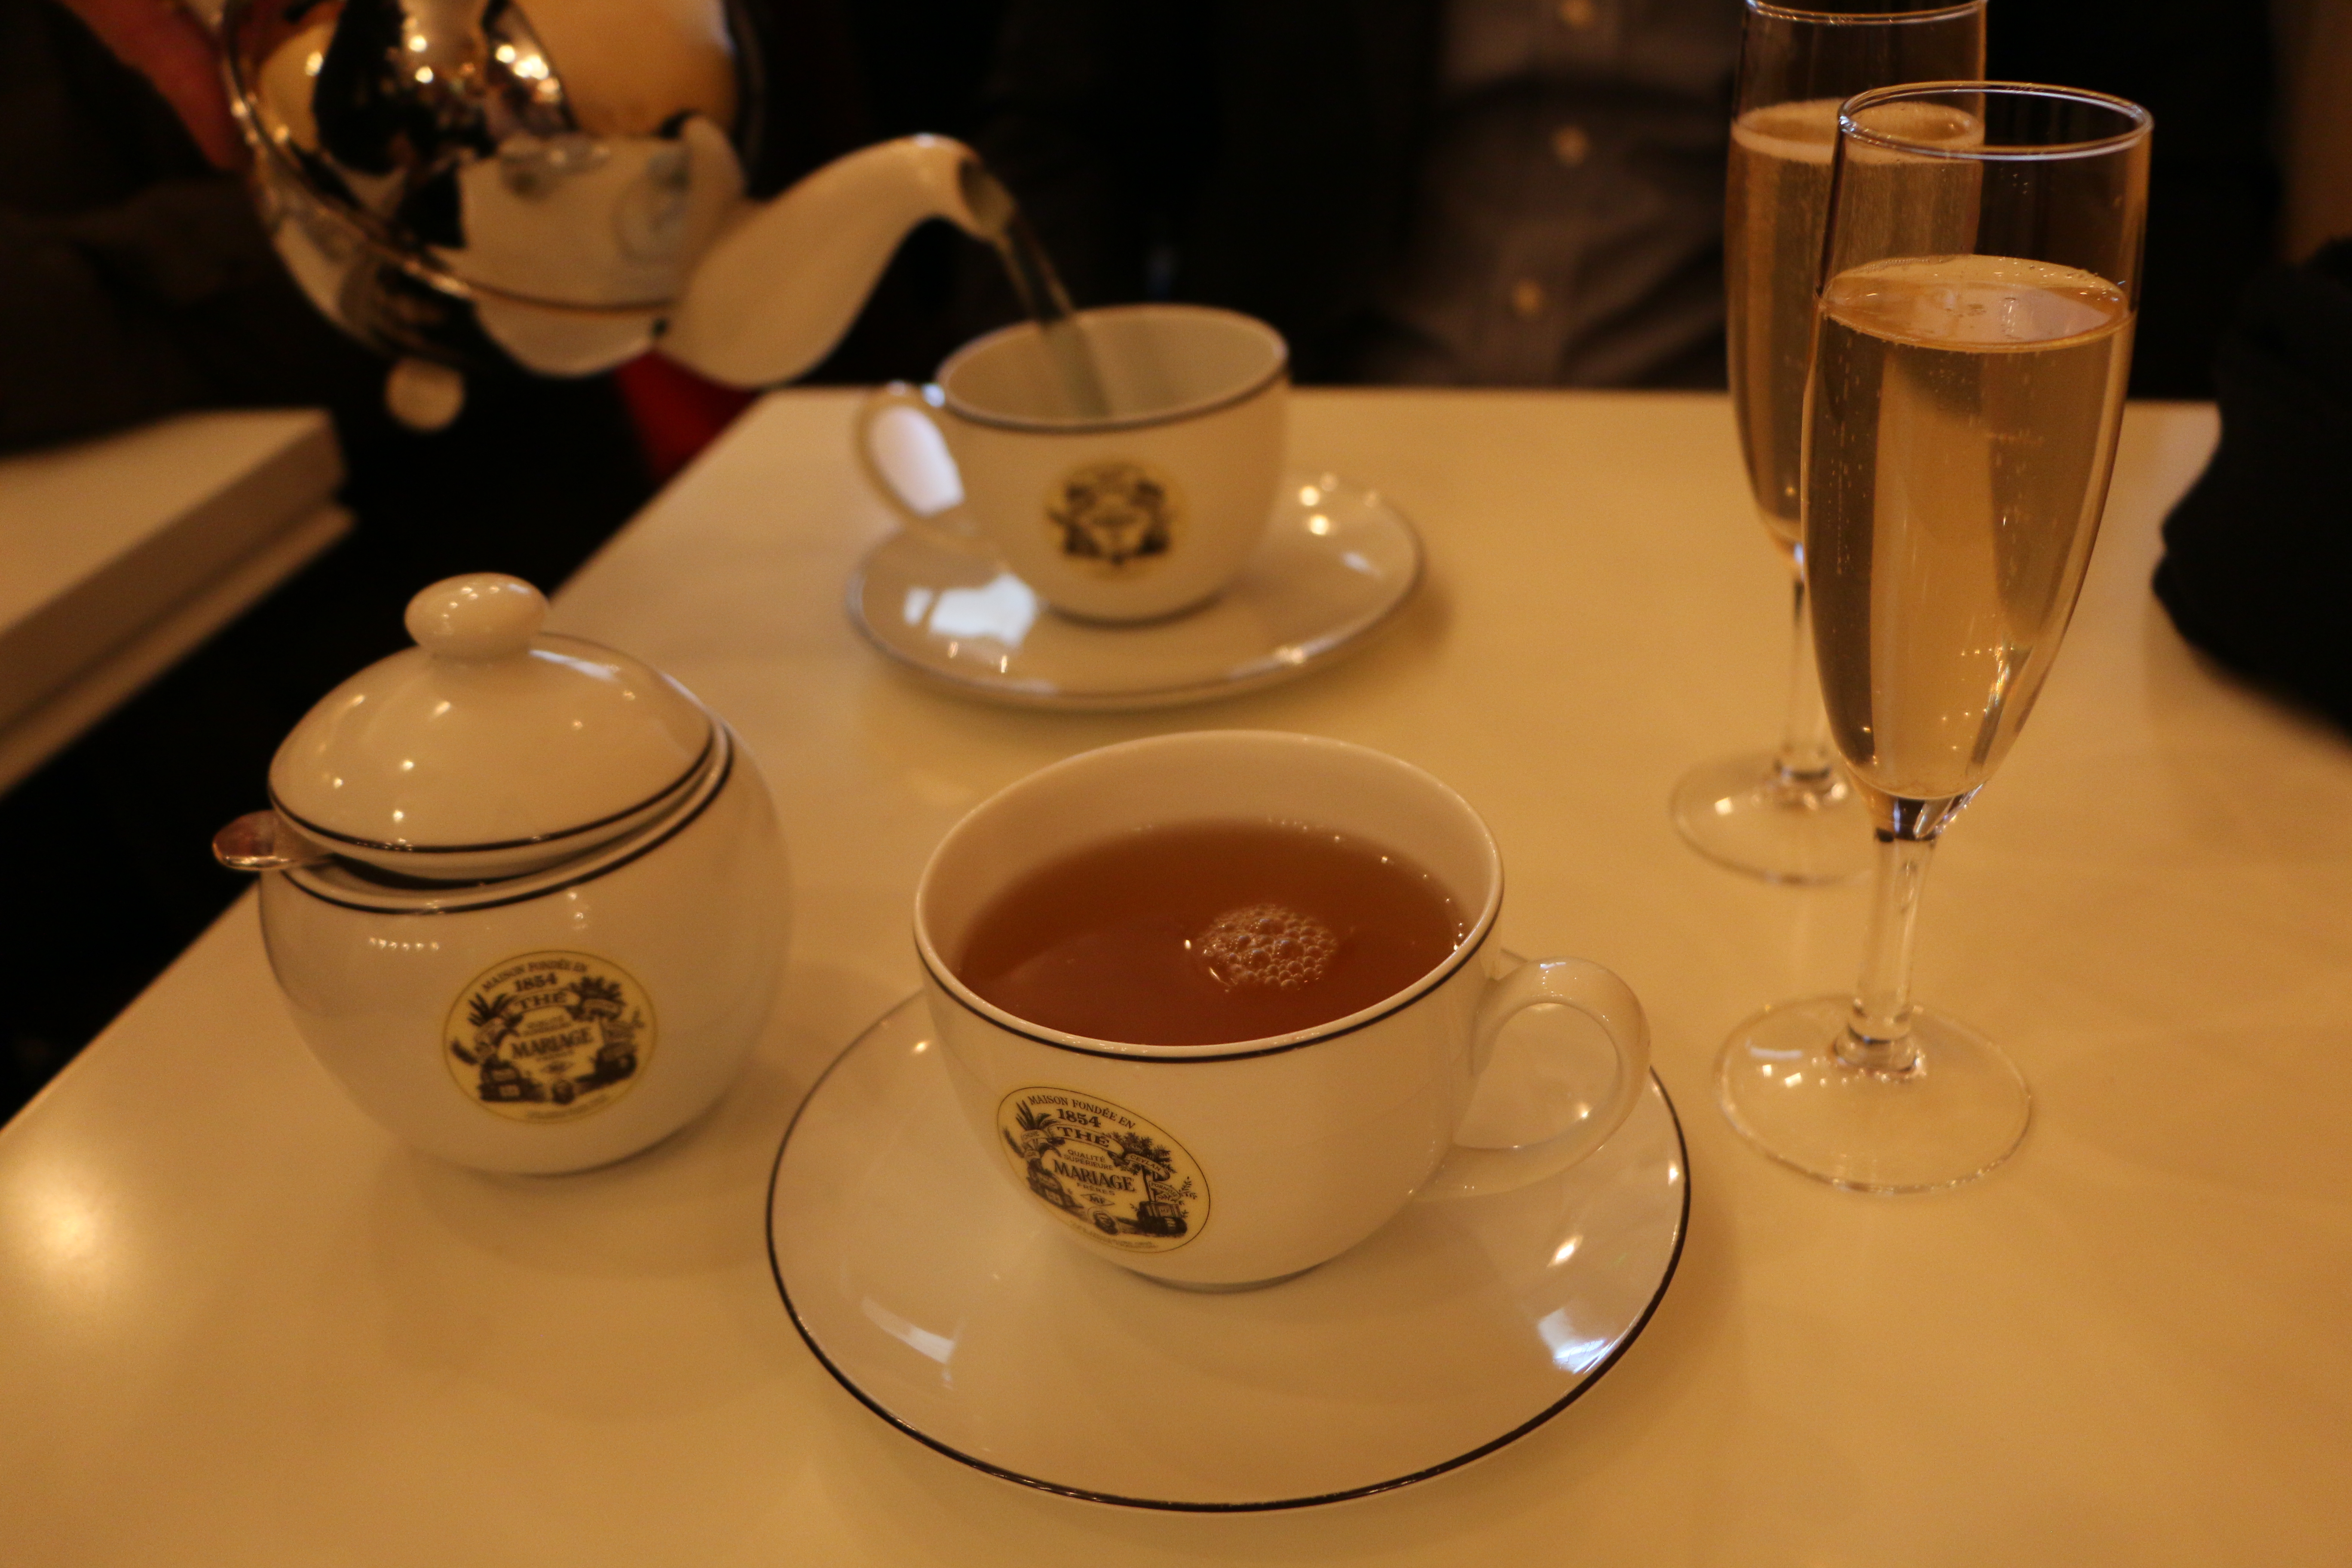 Mariage Frères christmas tea 2019 - Agent luxe blog